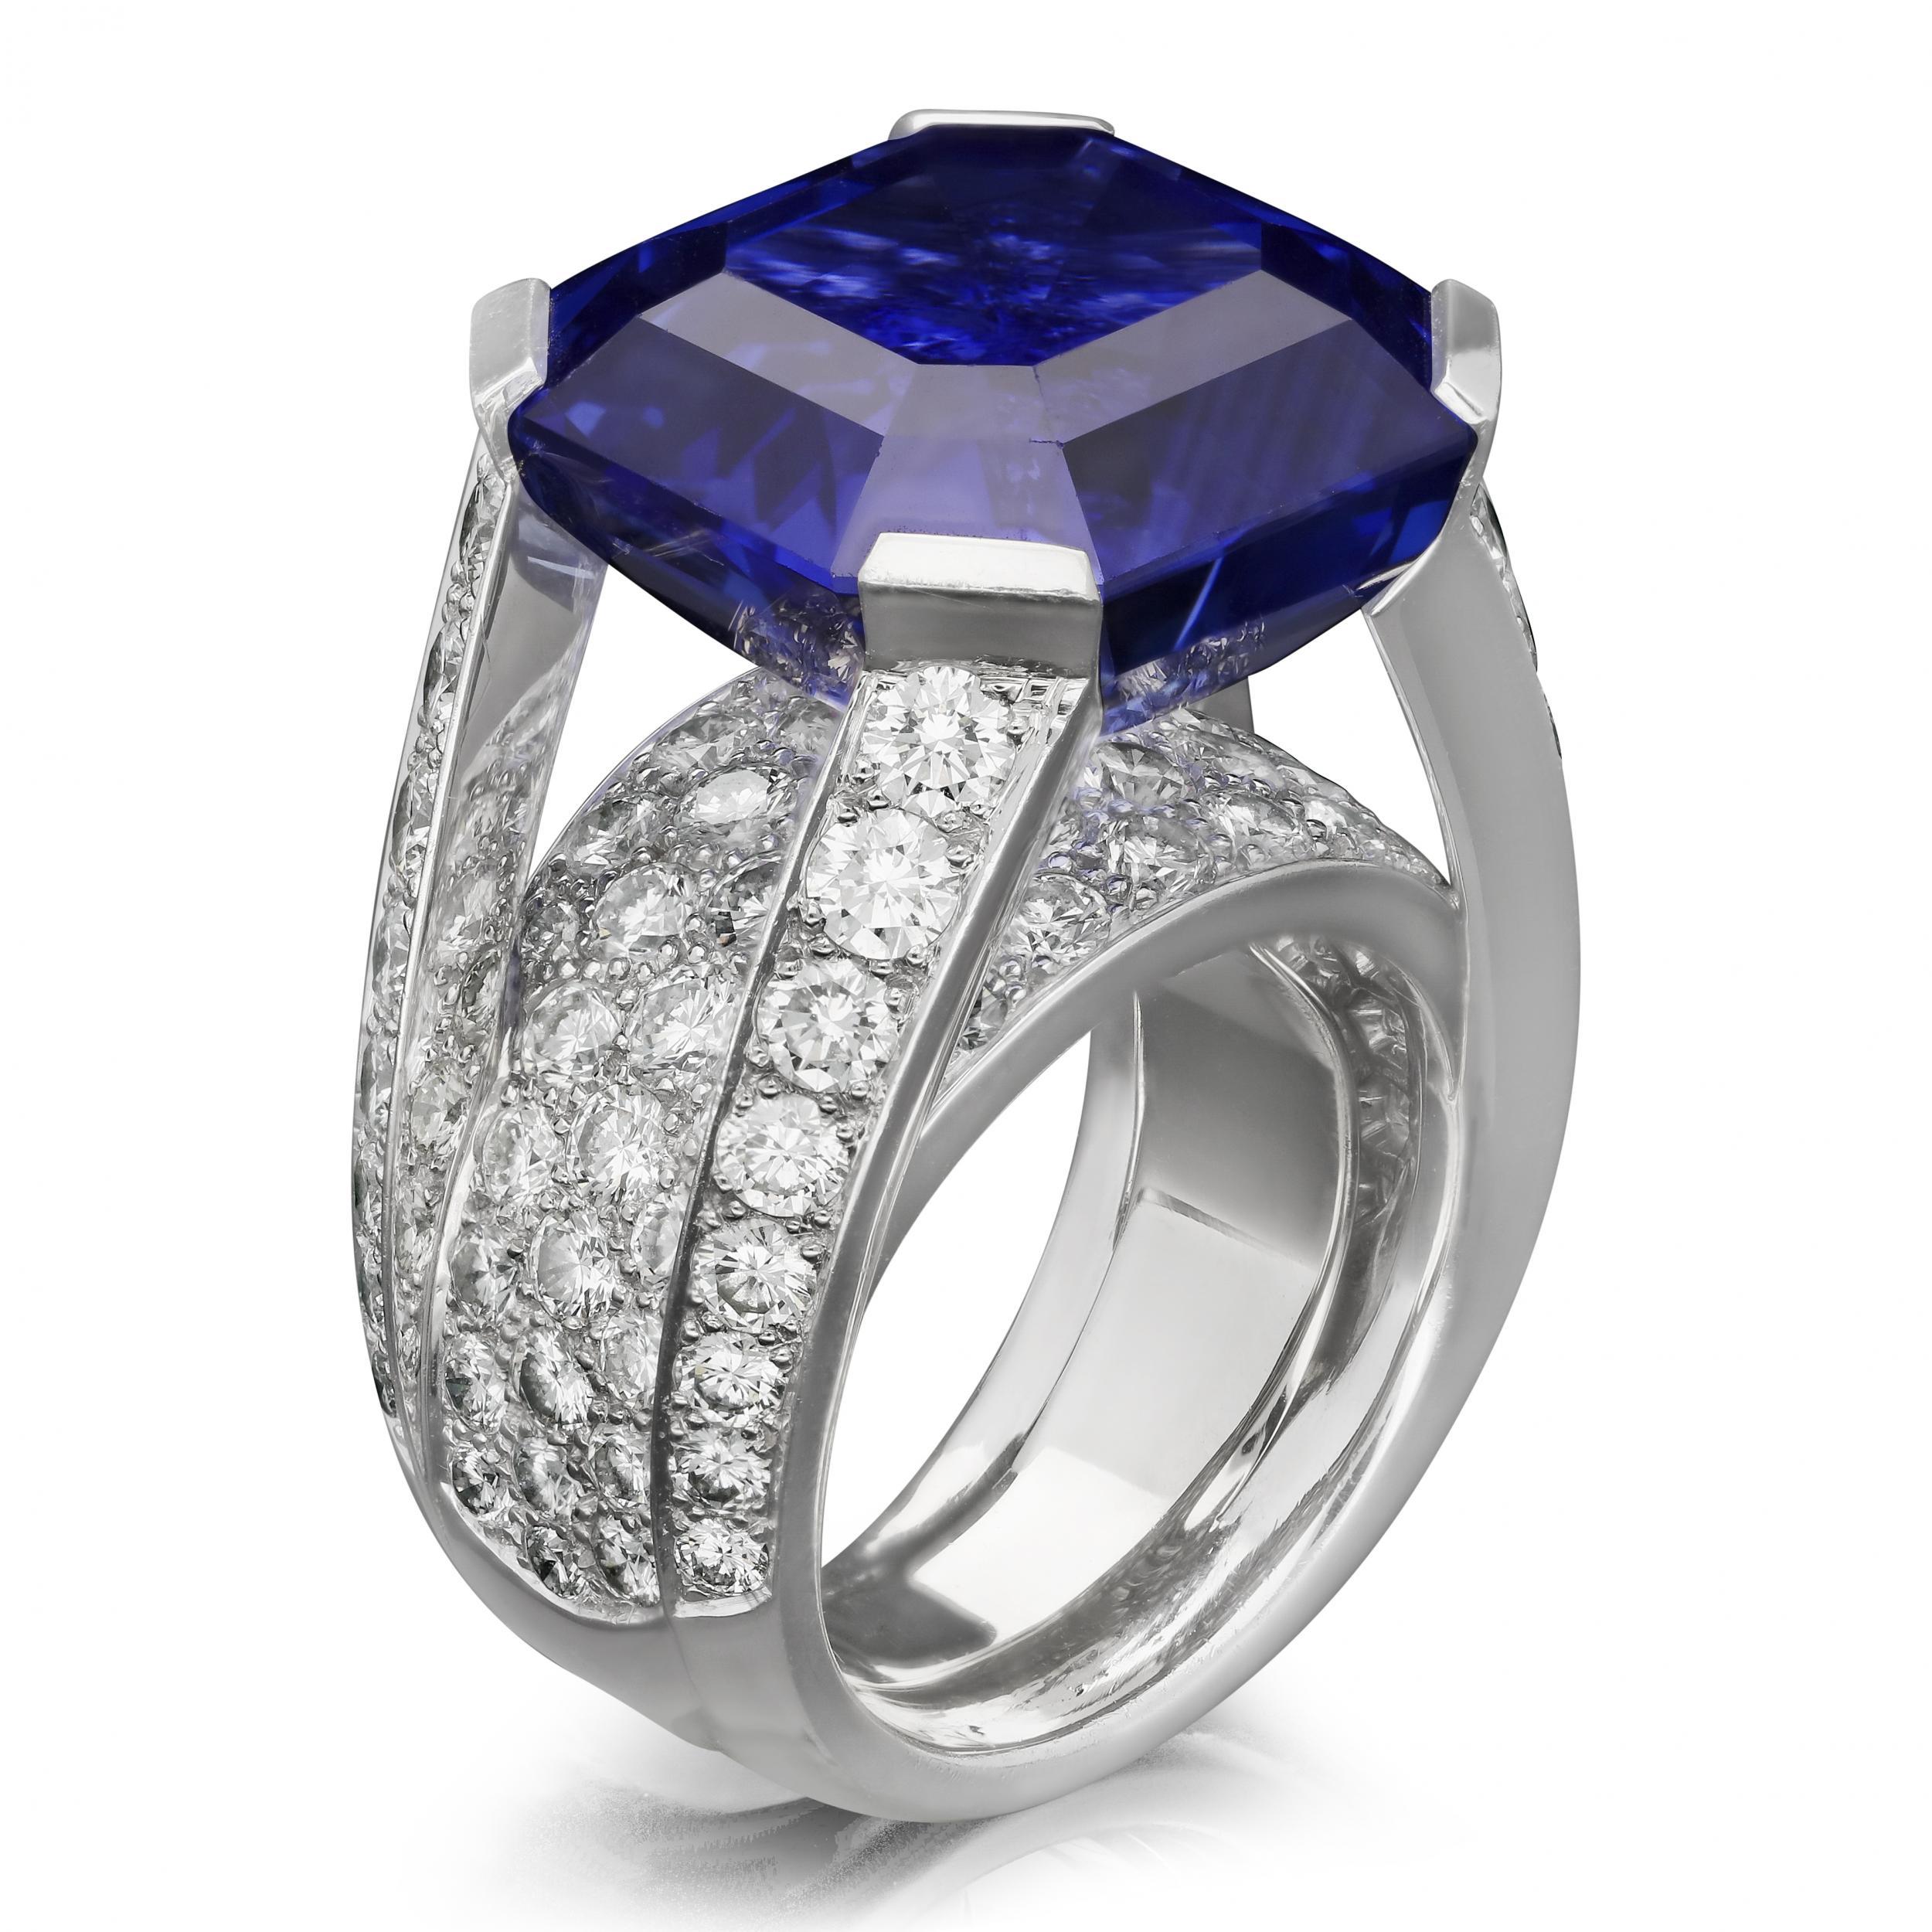 Description
A magnificent sapphire and diamond ring by Cartier c.2000s, centred with a beautiful octagonal blue Ceylon sapphire weighing 27.04ct set to each corner with a flat claw in an open gallery leaving the stone open to the light and raised